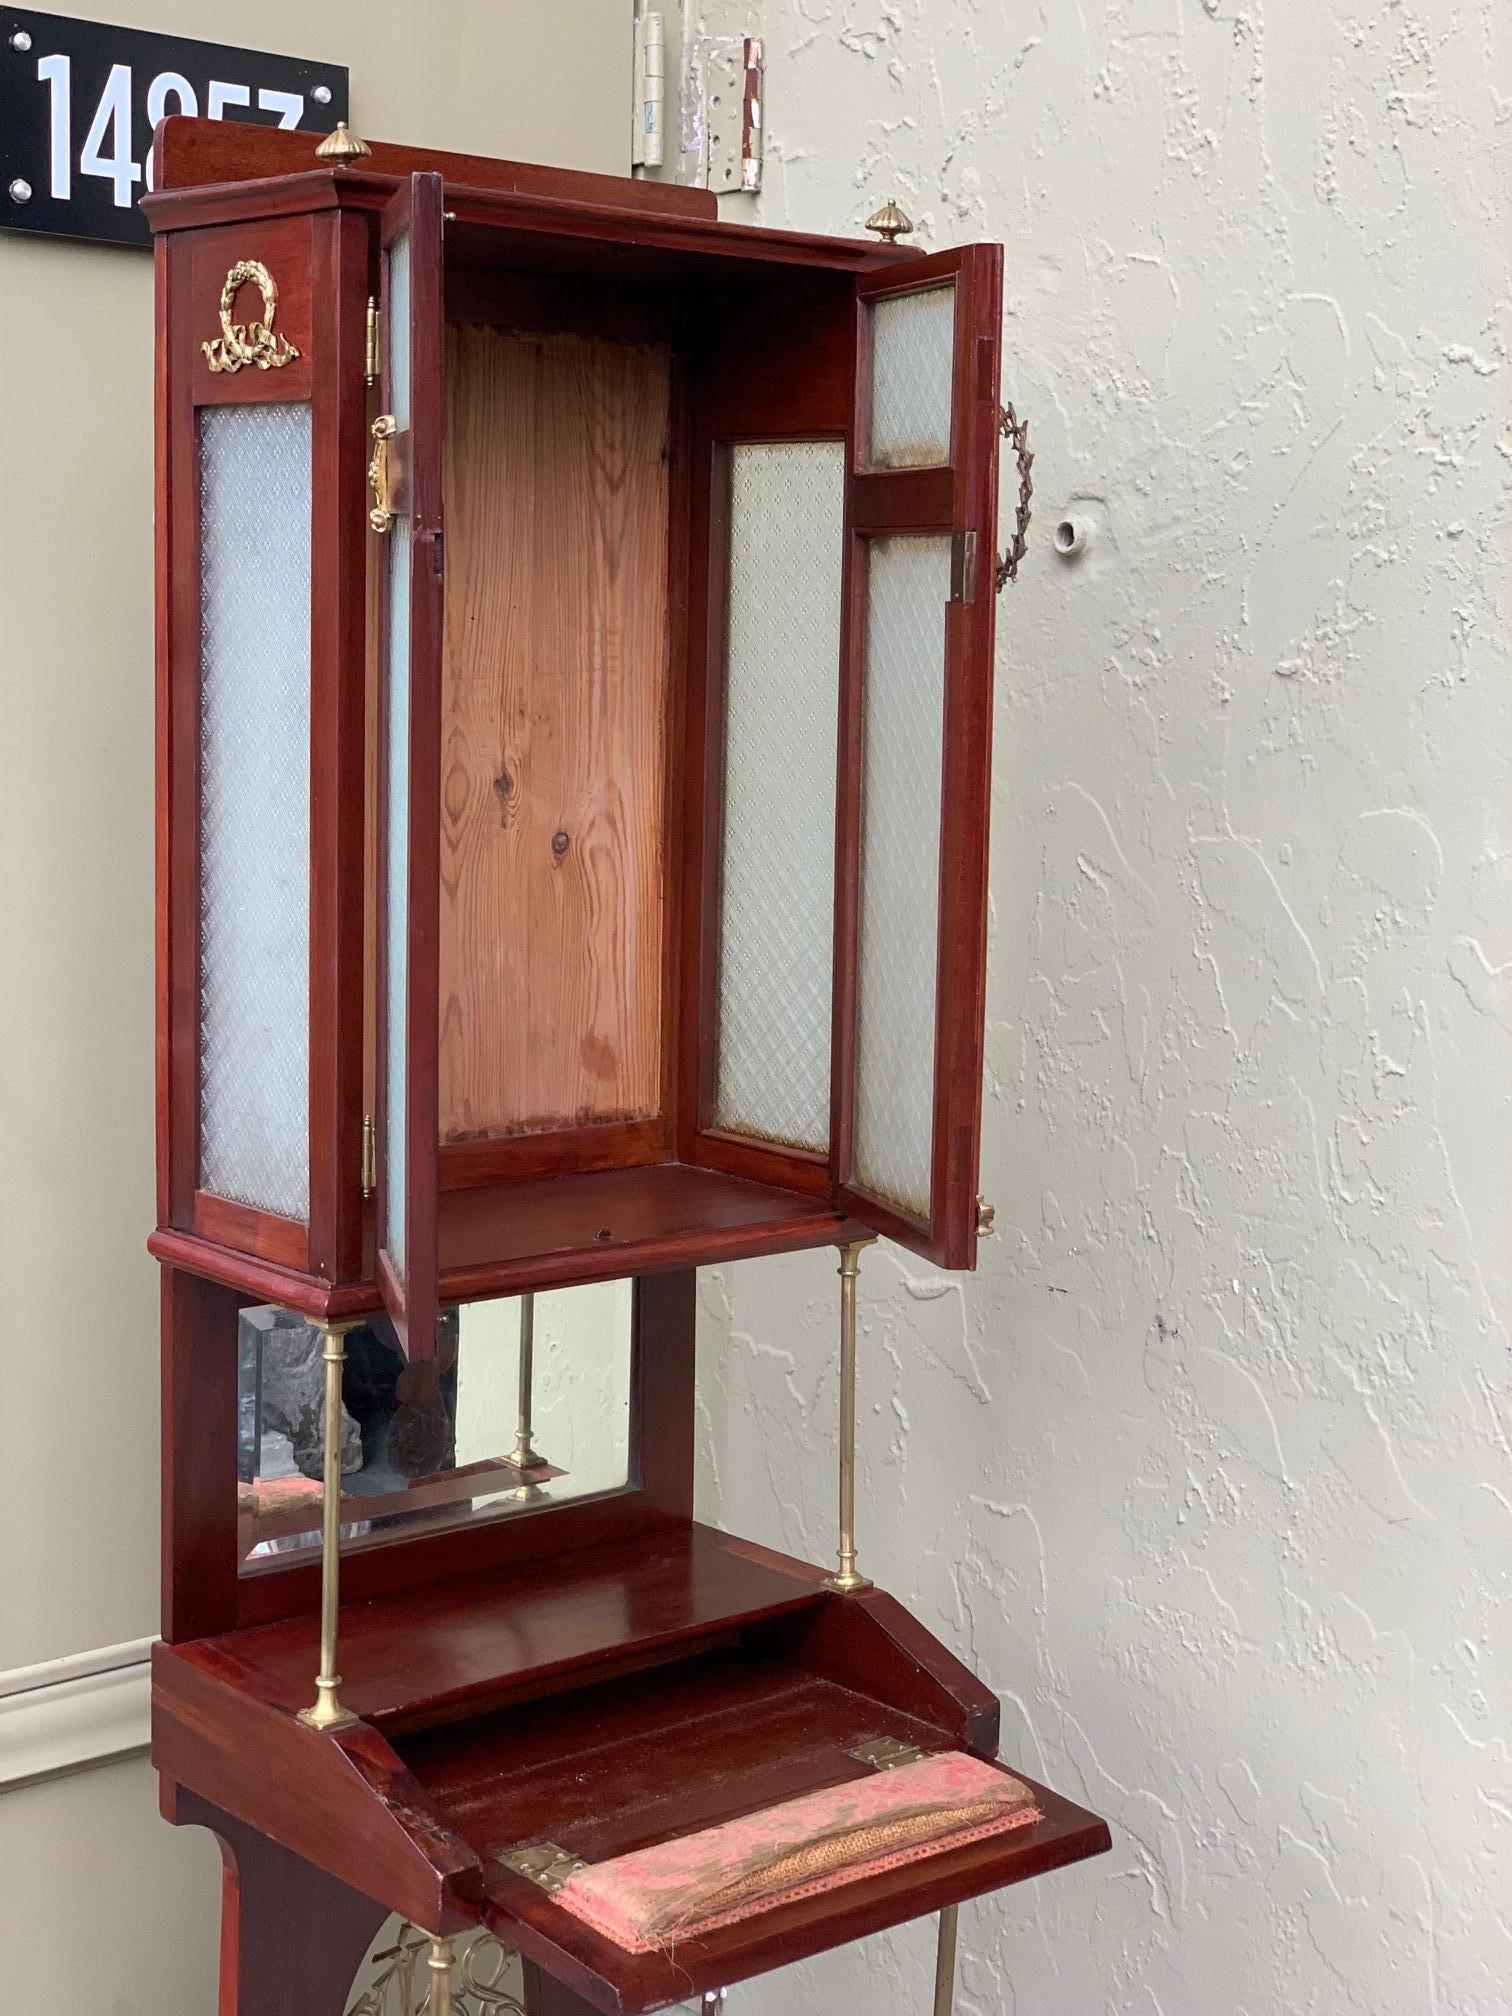 The Prie-Dieu is a type of prayer desk primarily intended for private devotional use, but may also be found in churches. It is a small, ornamental wooden desk furnished with a thin, sloping shelf for books or hands, and a kneeler. Sometimes, instead